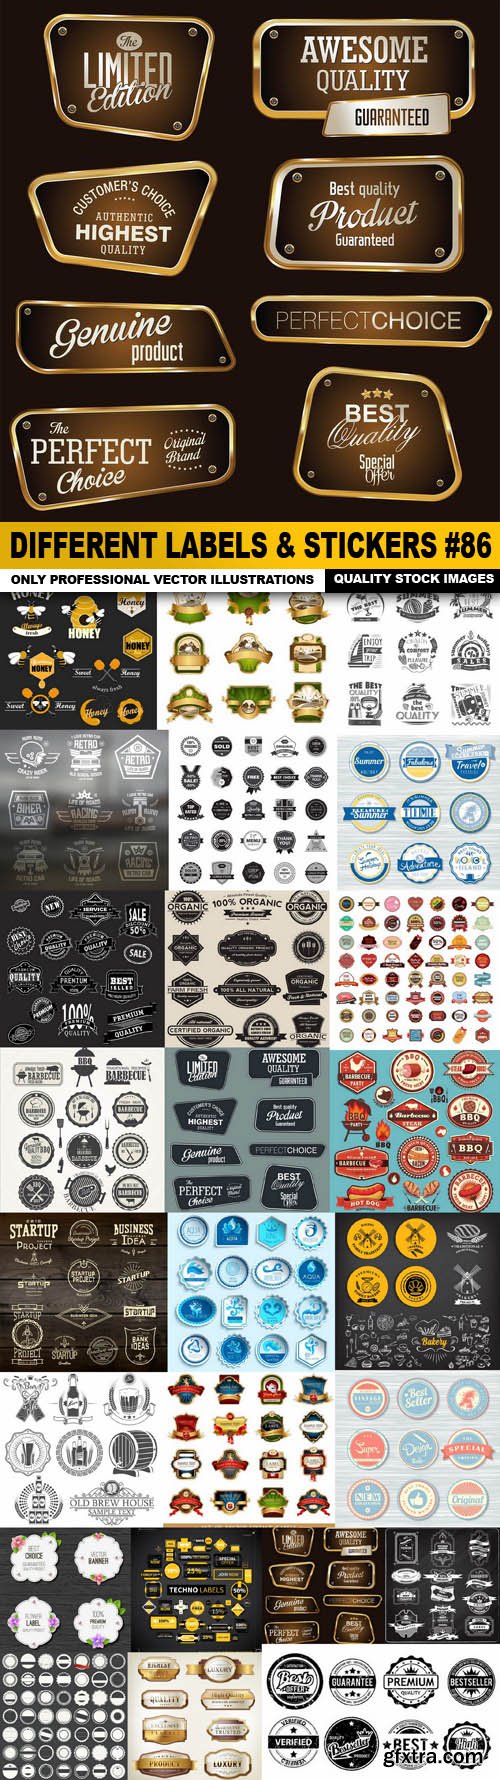 Different Labels & Stickers #86 - 25 Vector